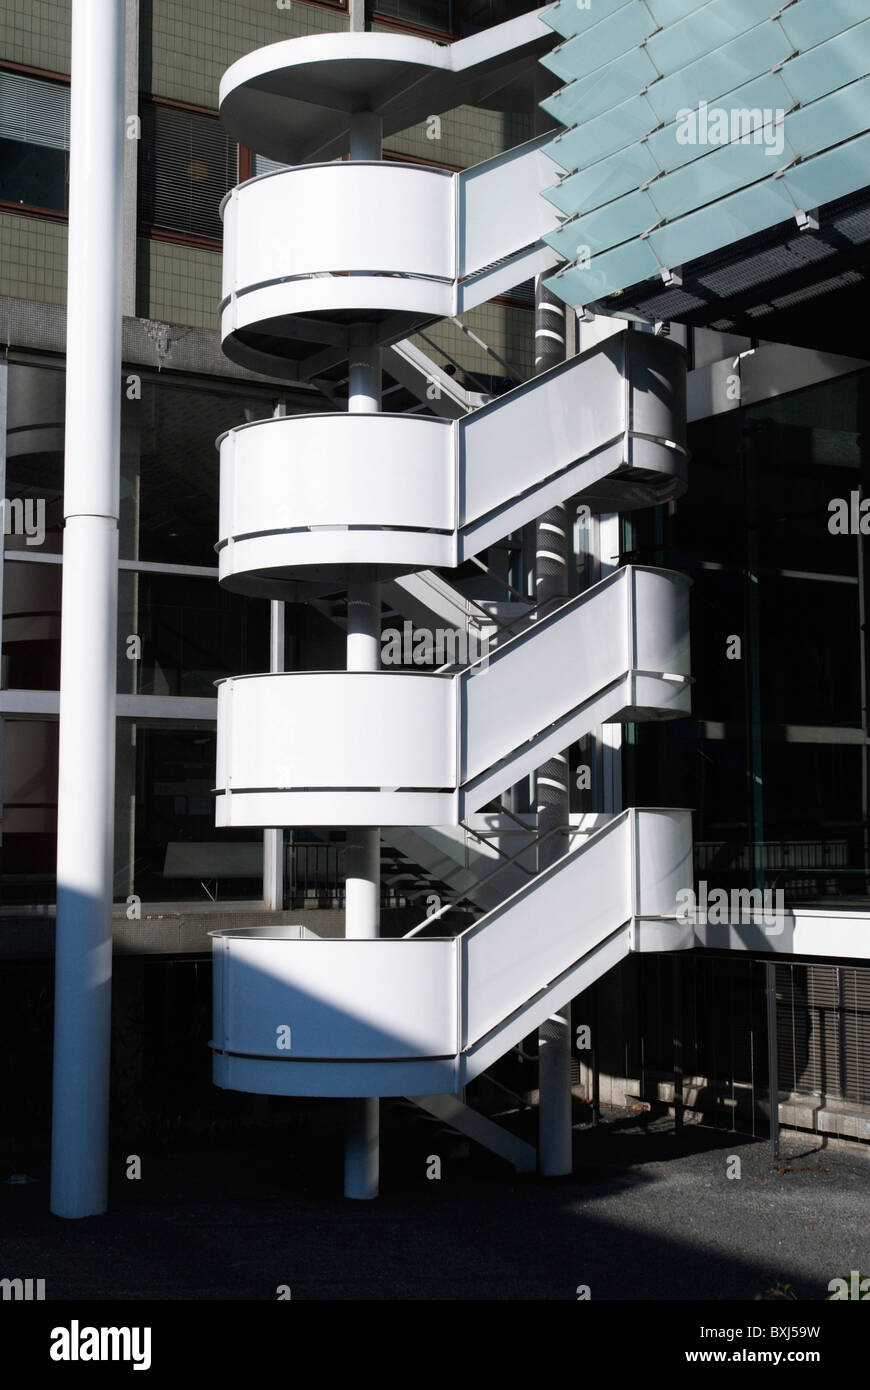 Spiral staircase on the Tanaka Business School Imperial College London UK Stock Photo